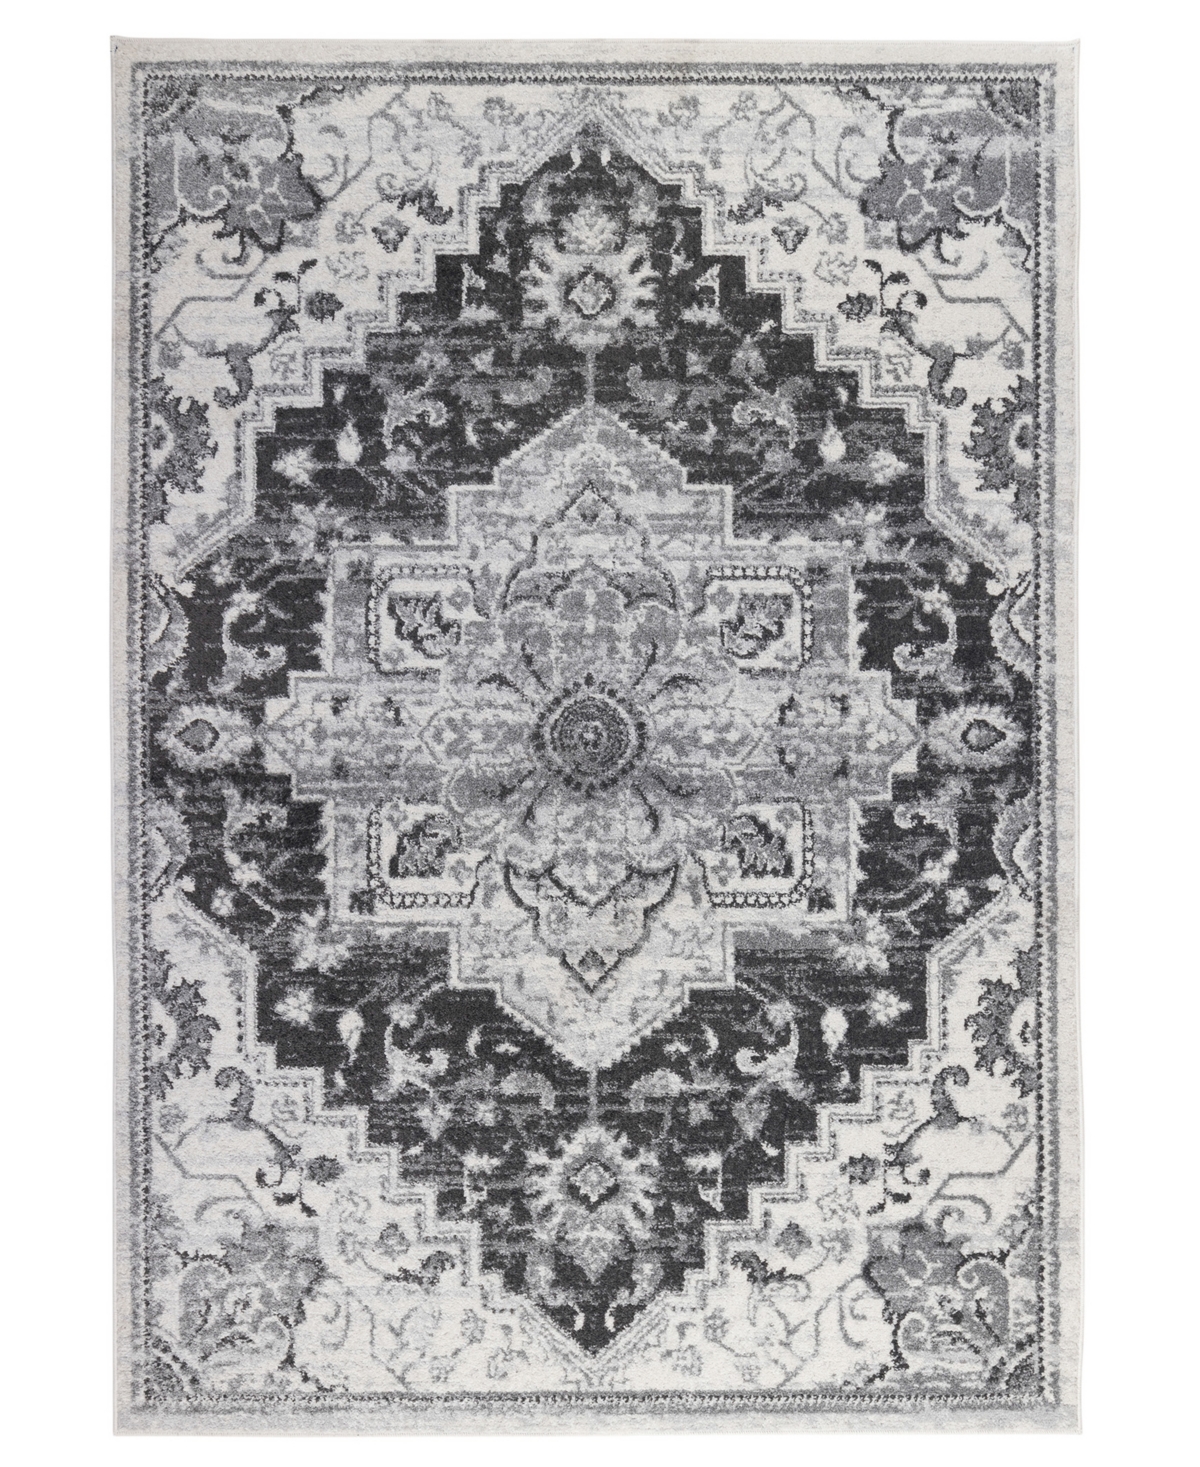 Km Home Gadsby Gad88 2' X 3' Area Rug In Charcoal